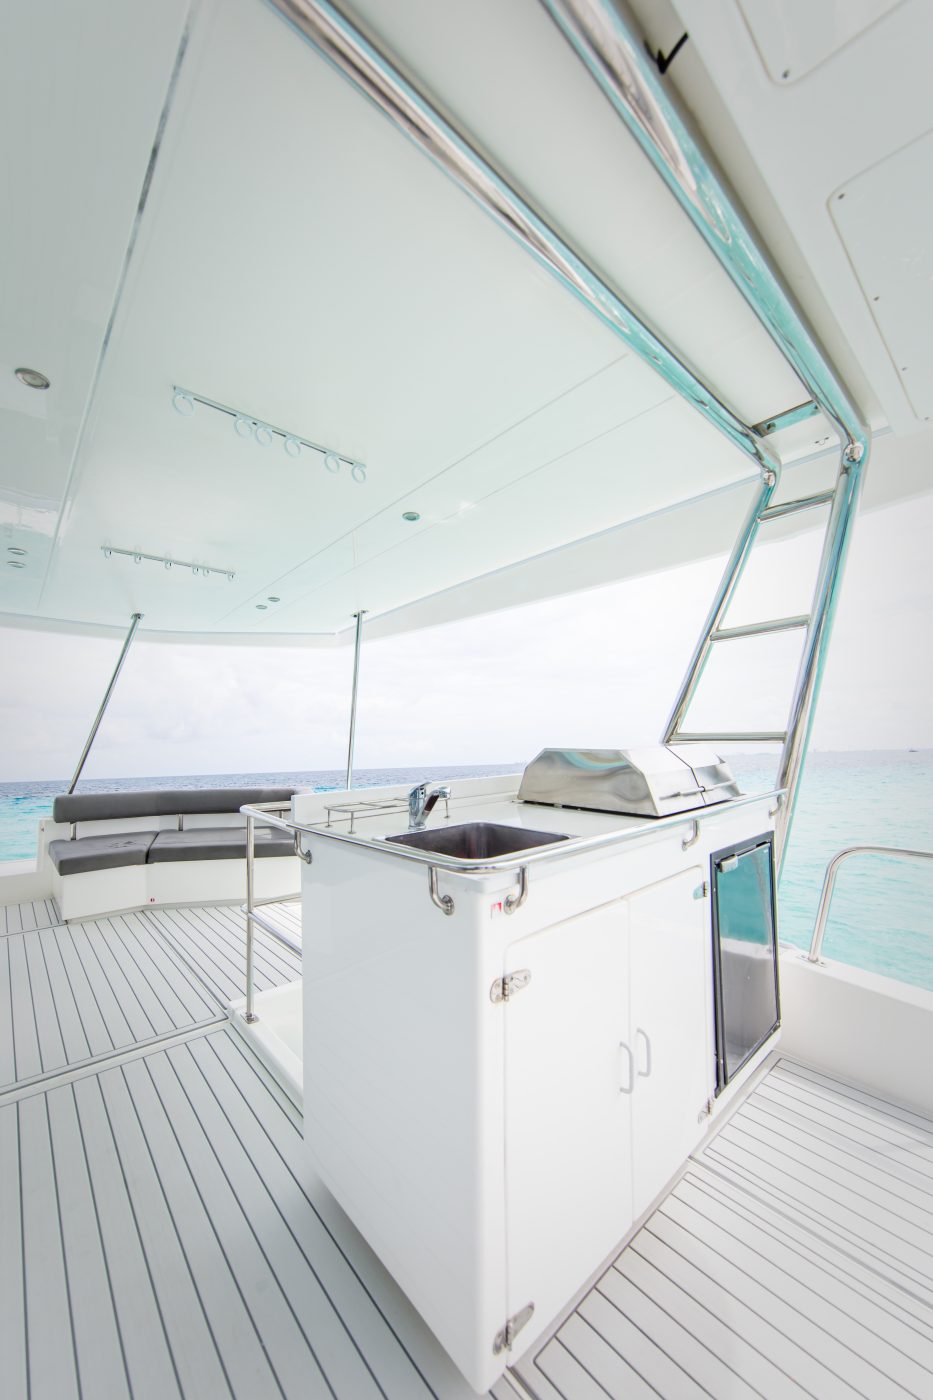 Leopard Catamaran for Luxury Yacht Charters from Cancun outdoor washhands